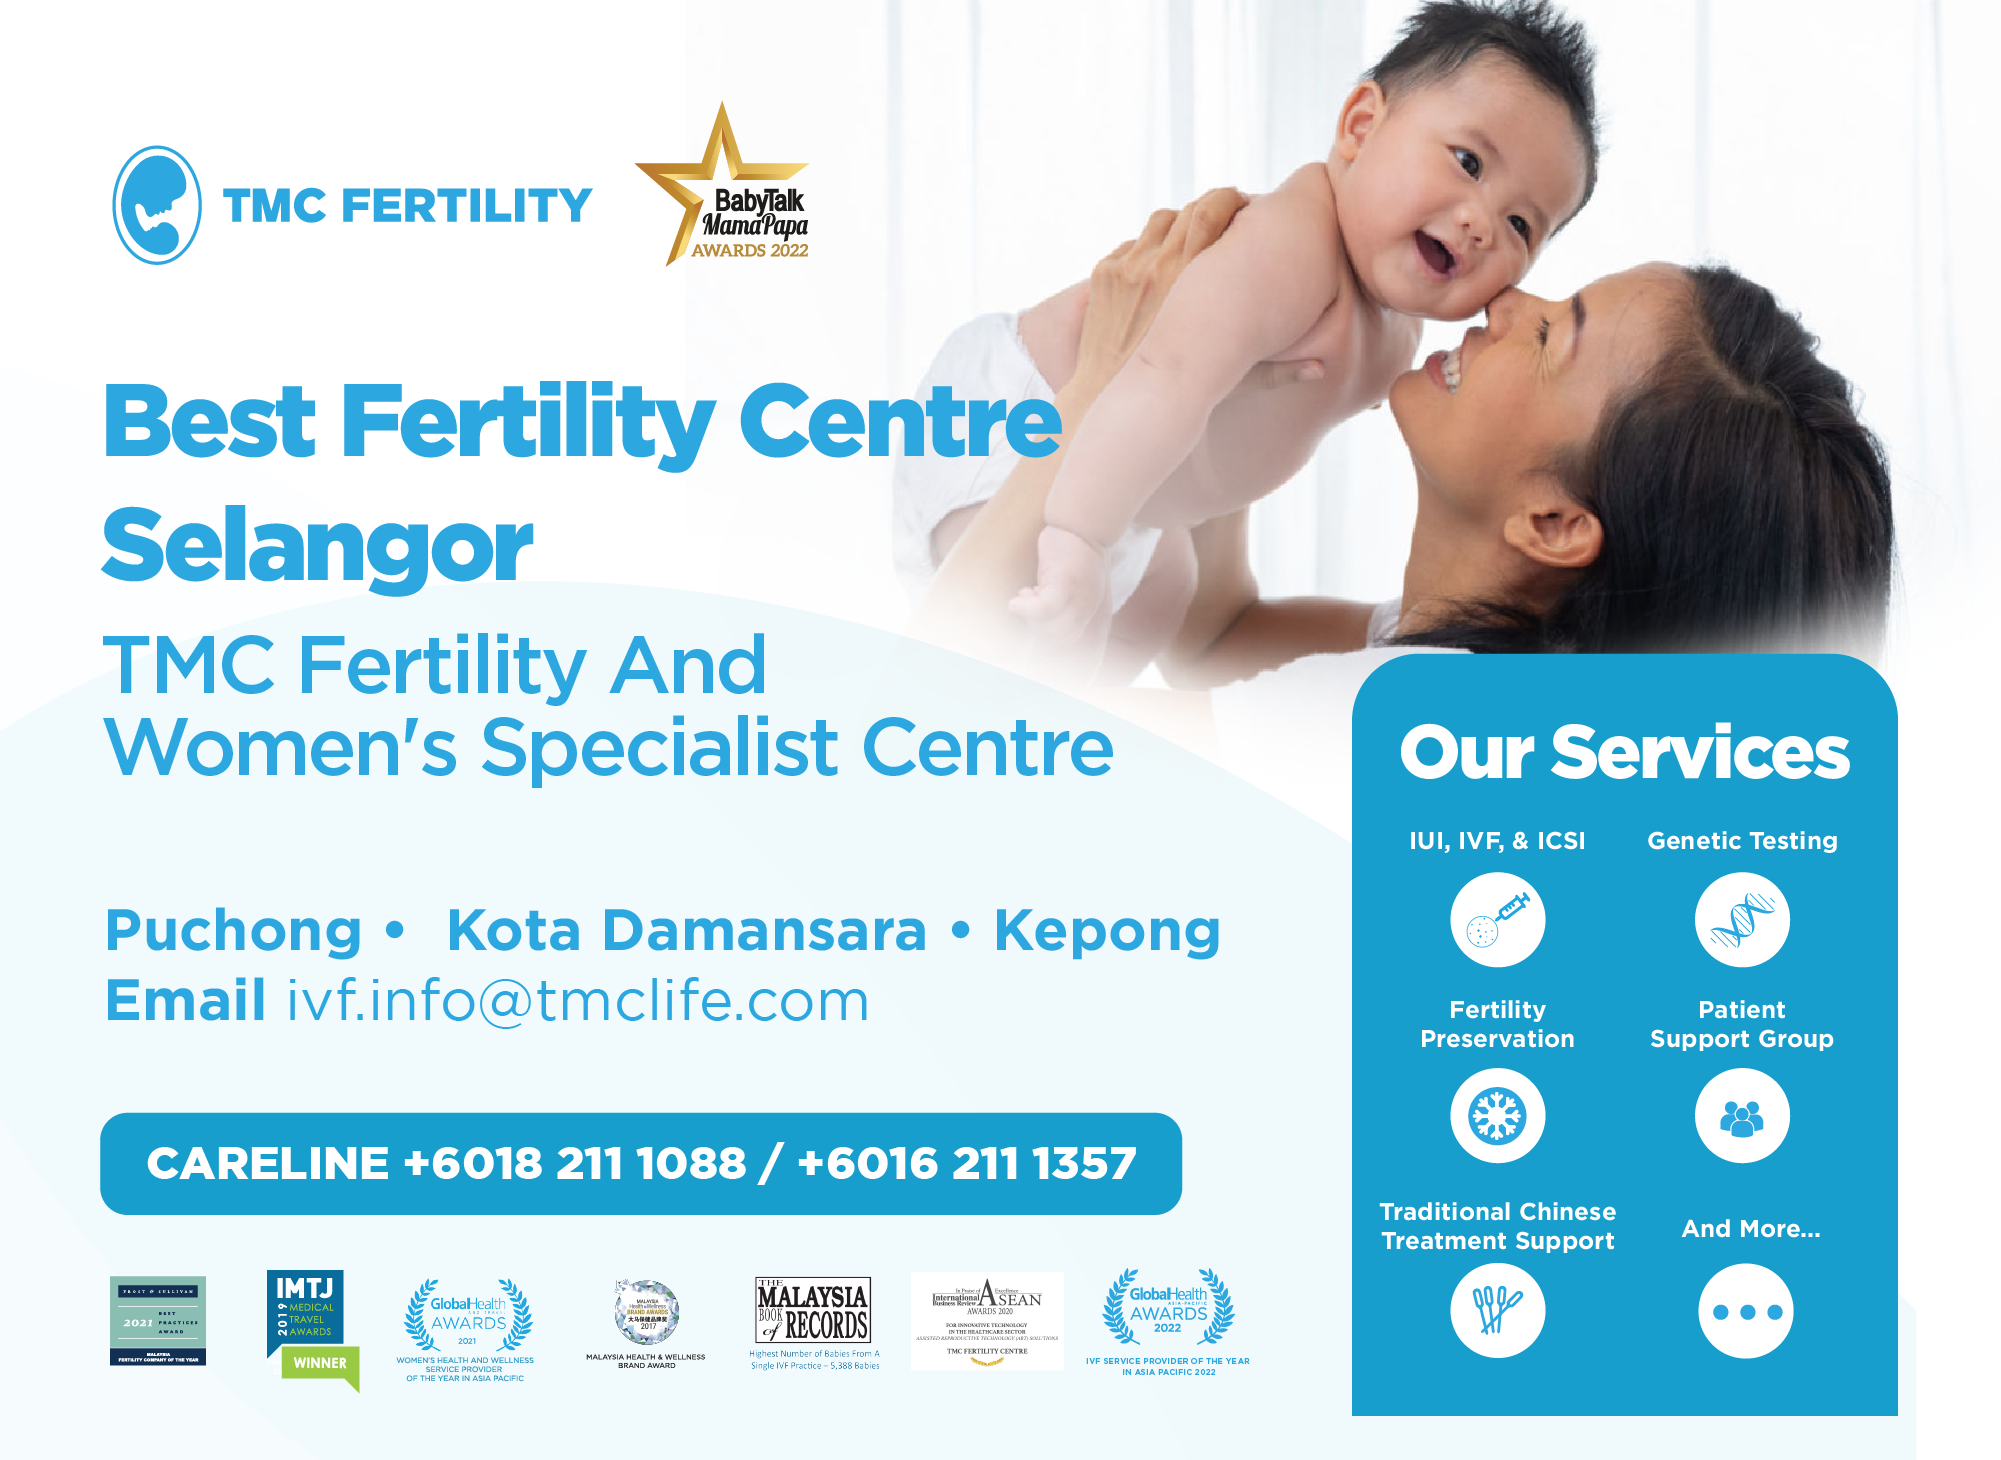 The Fertility Specialist Centre of Choice in Selangor